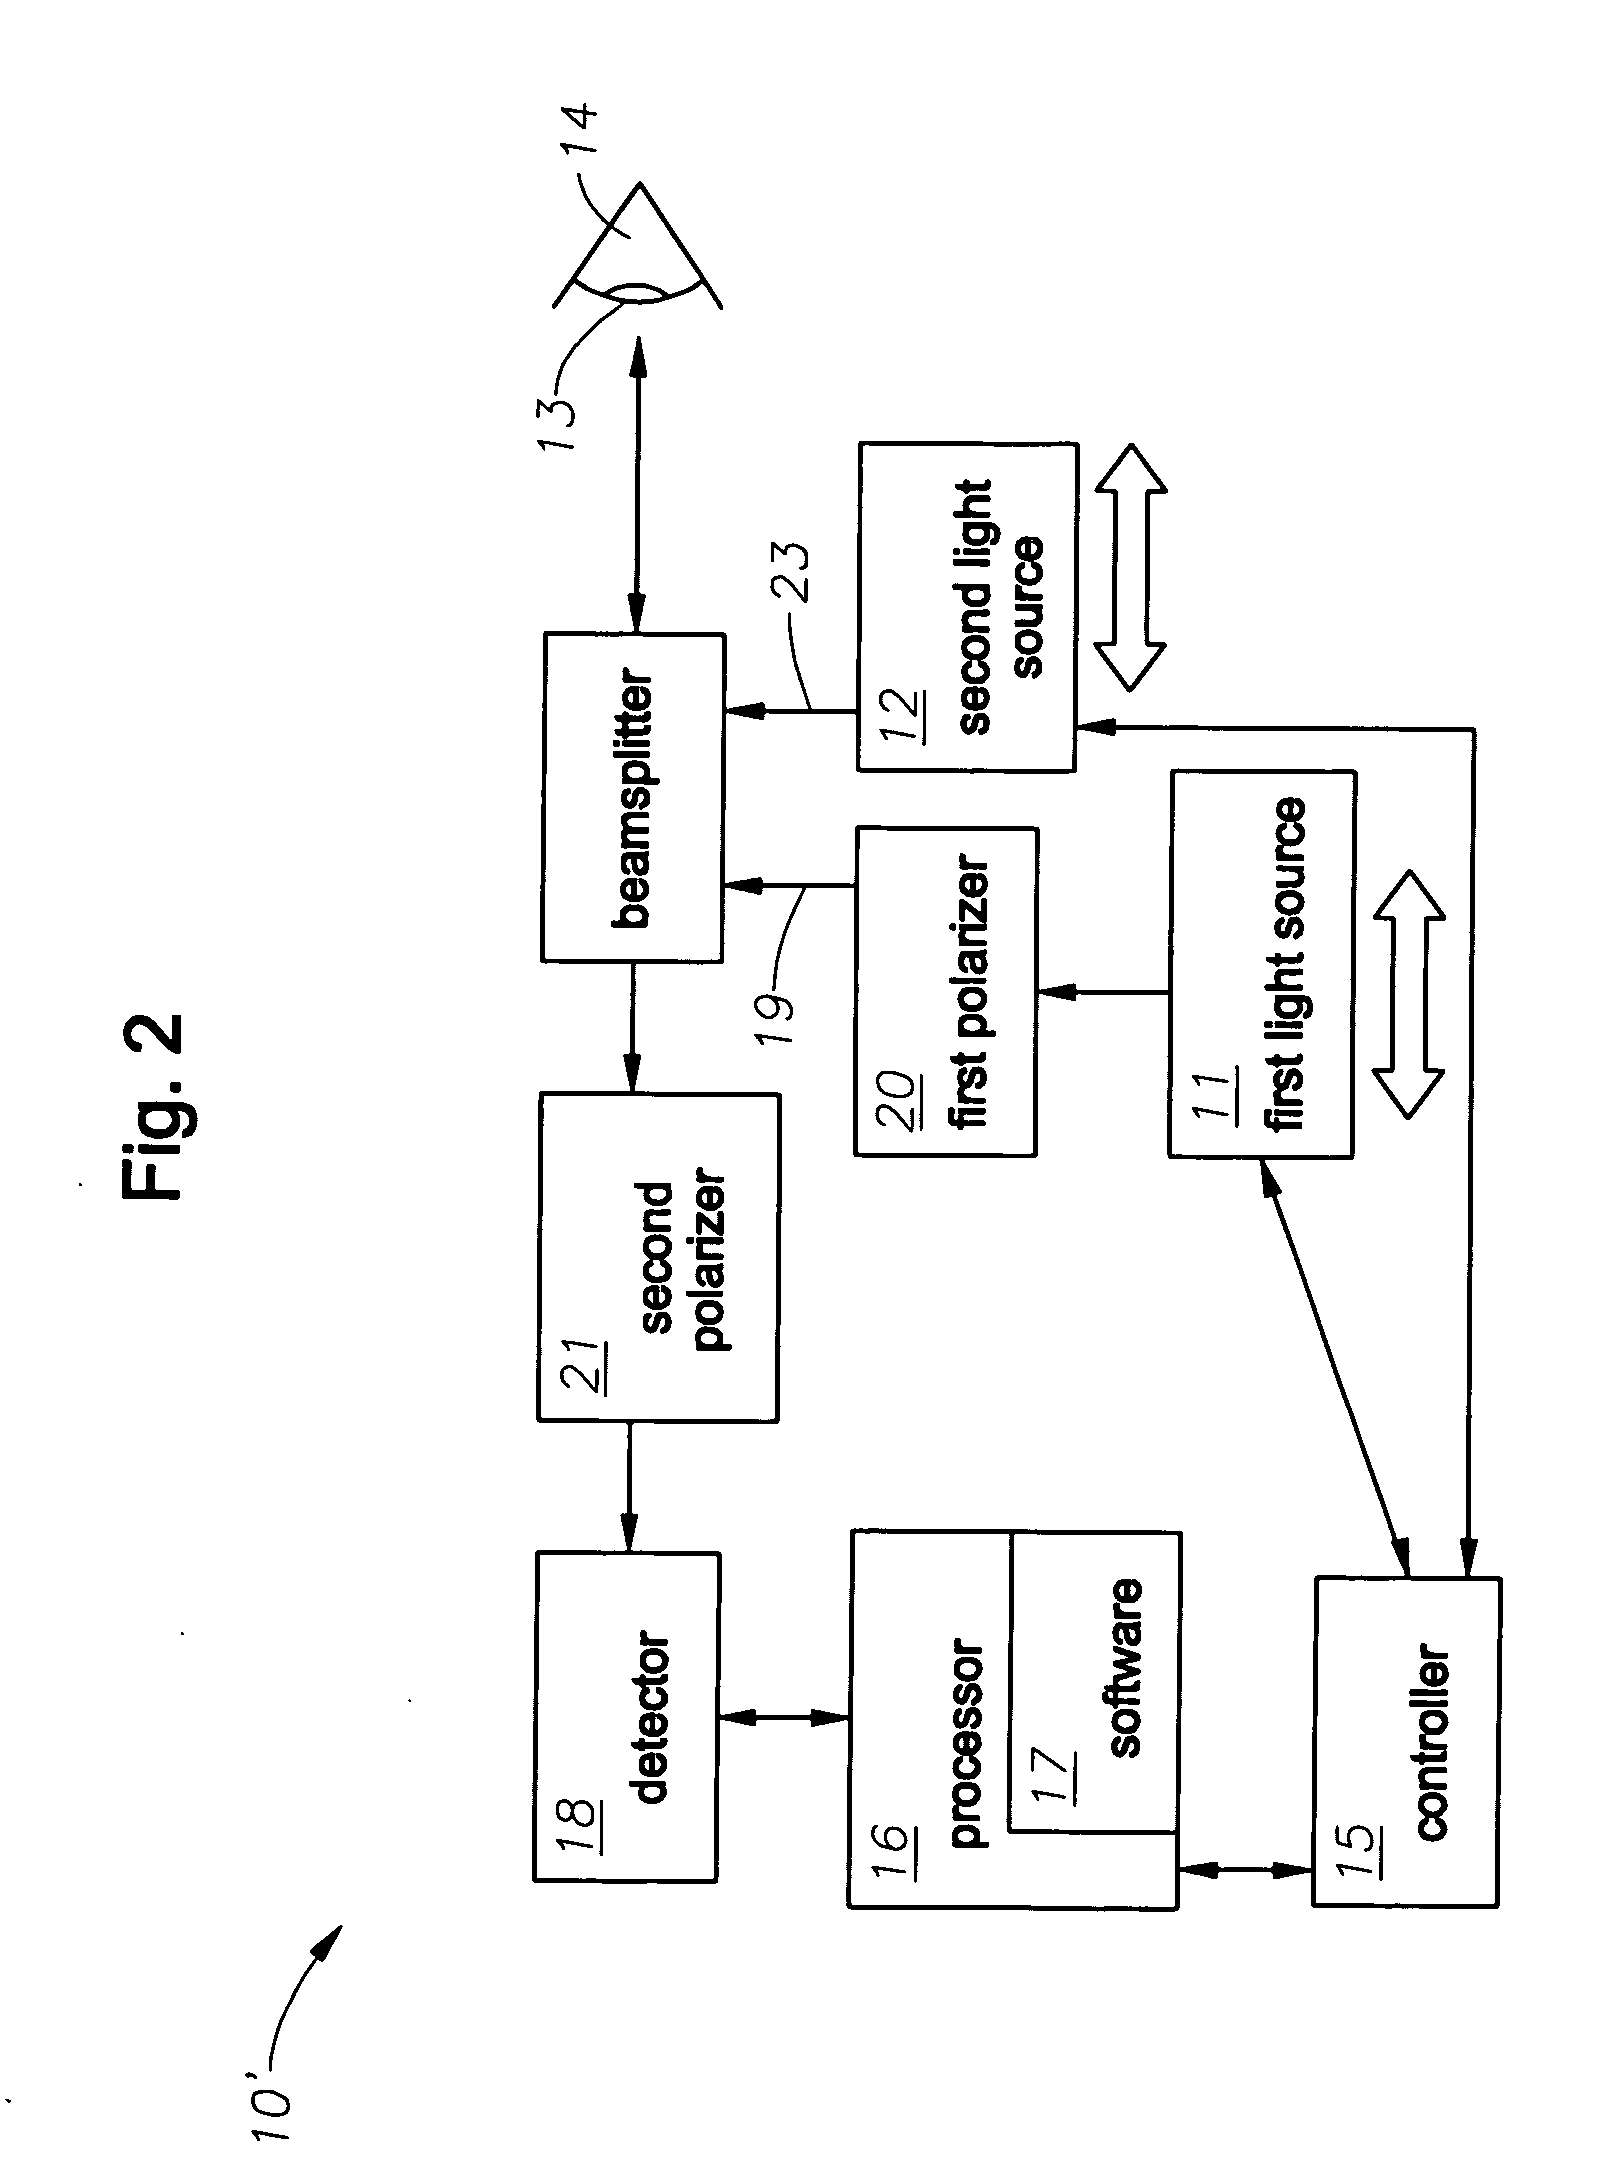 Illumination characteristic selection system for imaging during an ophthalmic laser procedure and associated methods